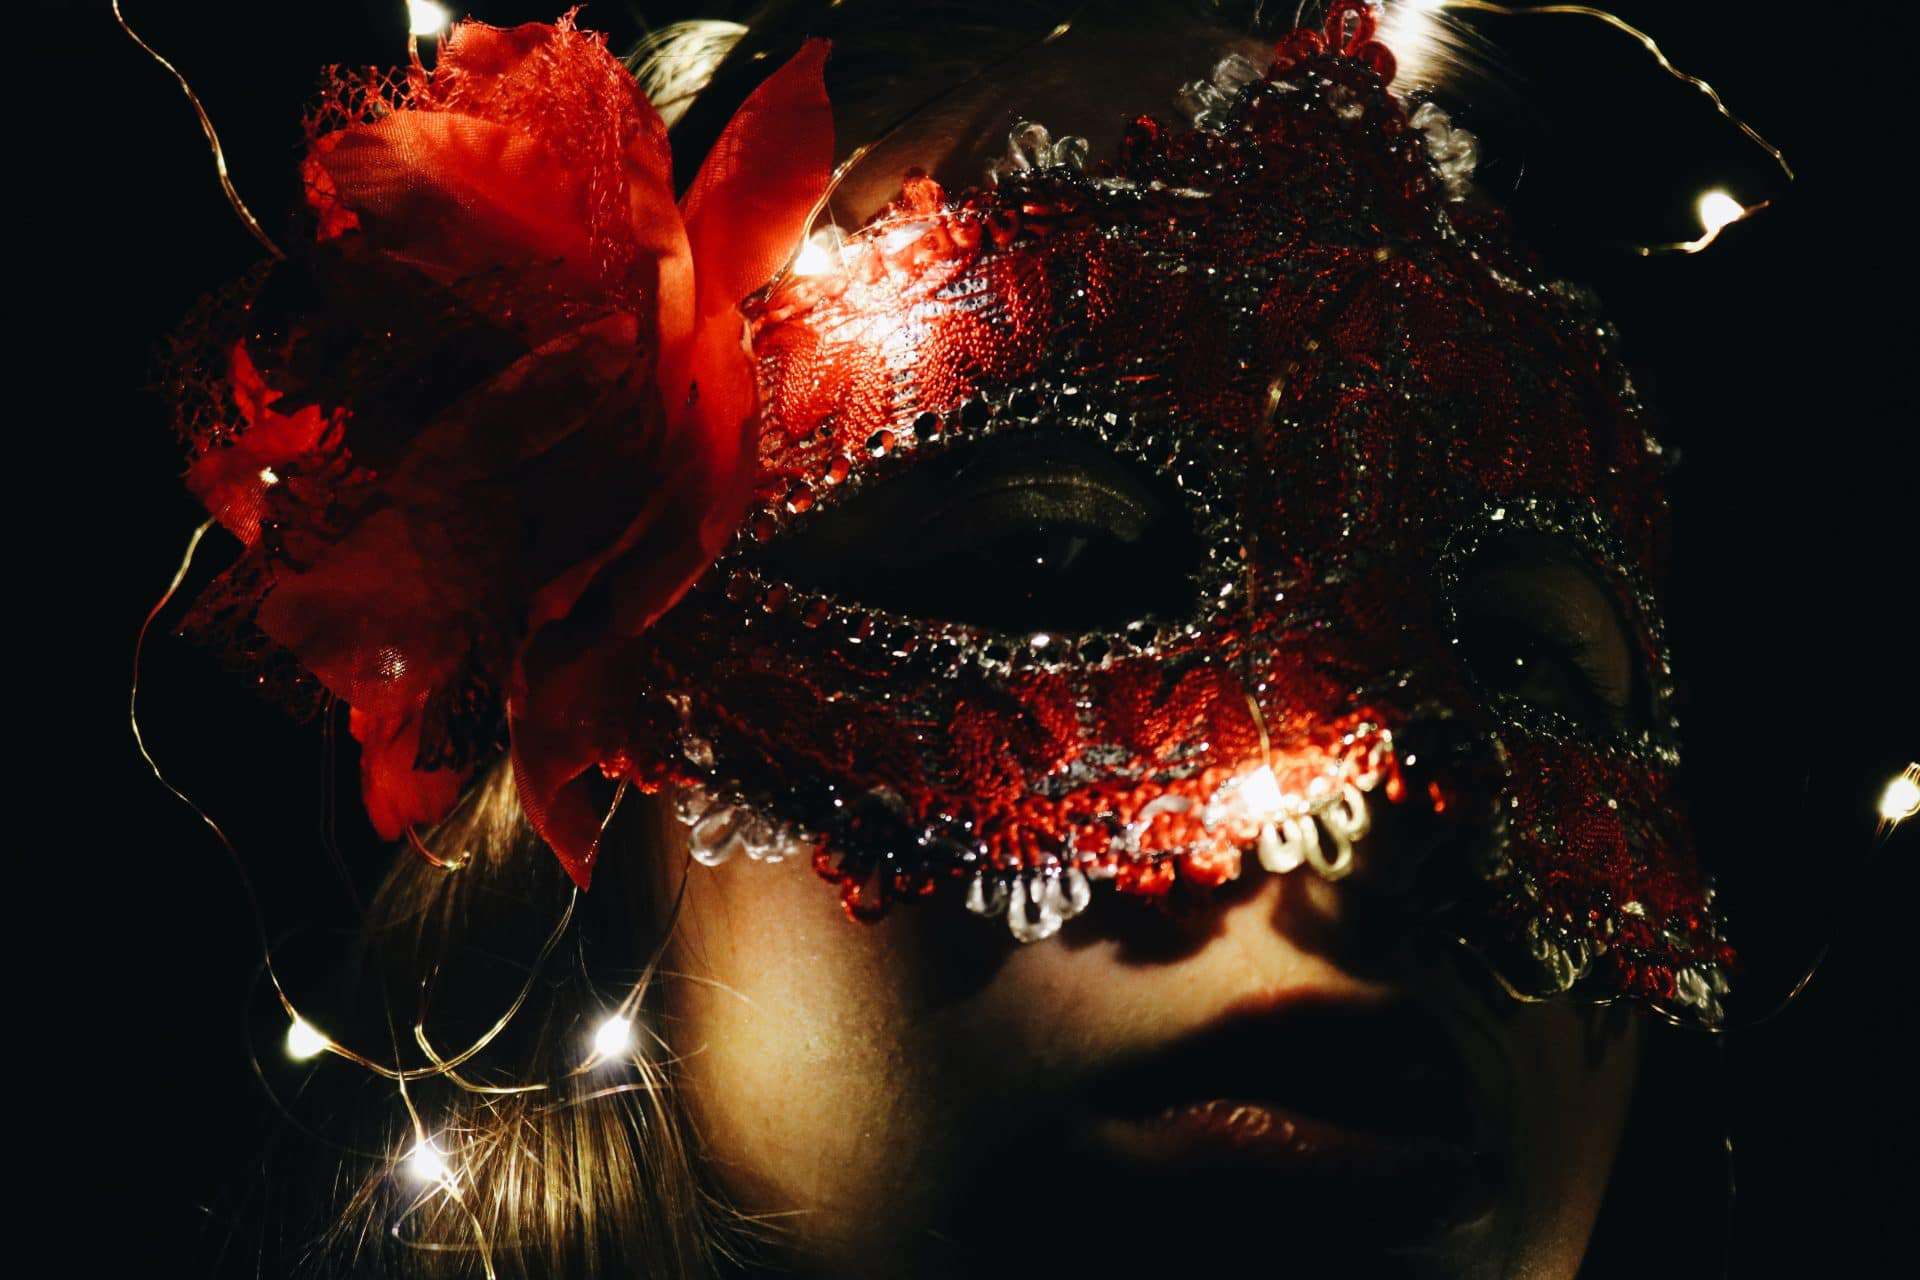 Girl wearing a red mask